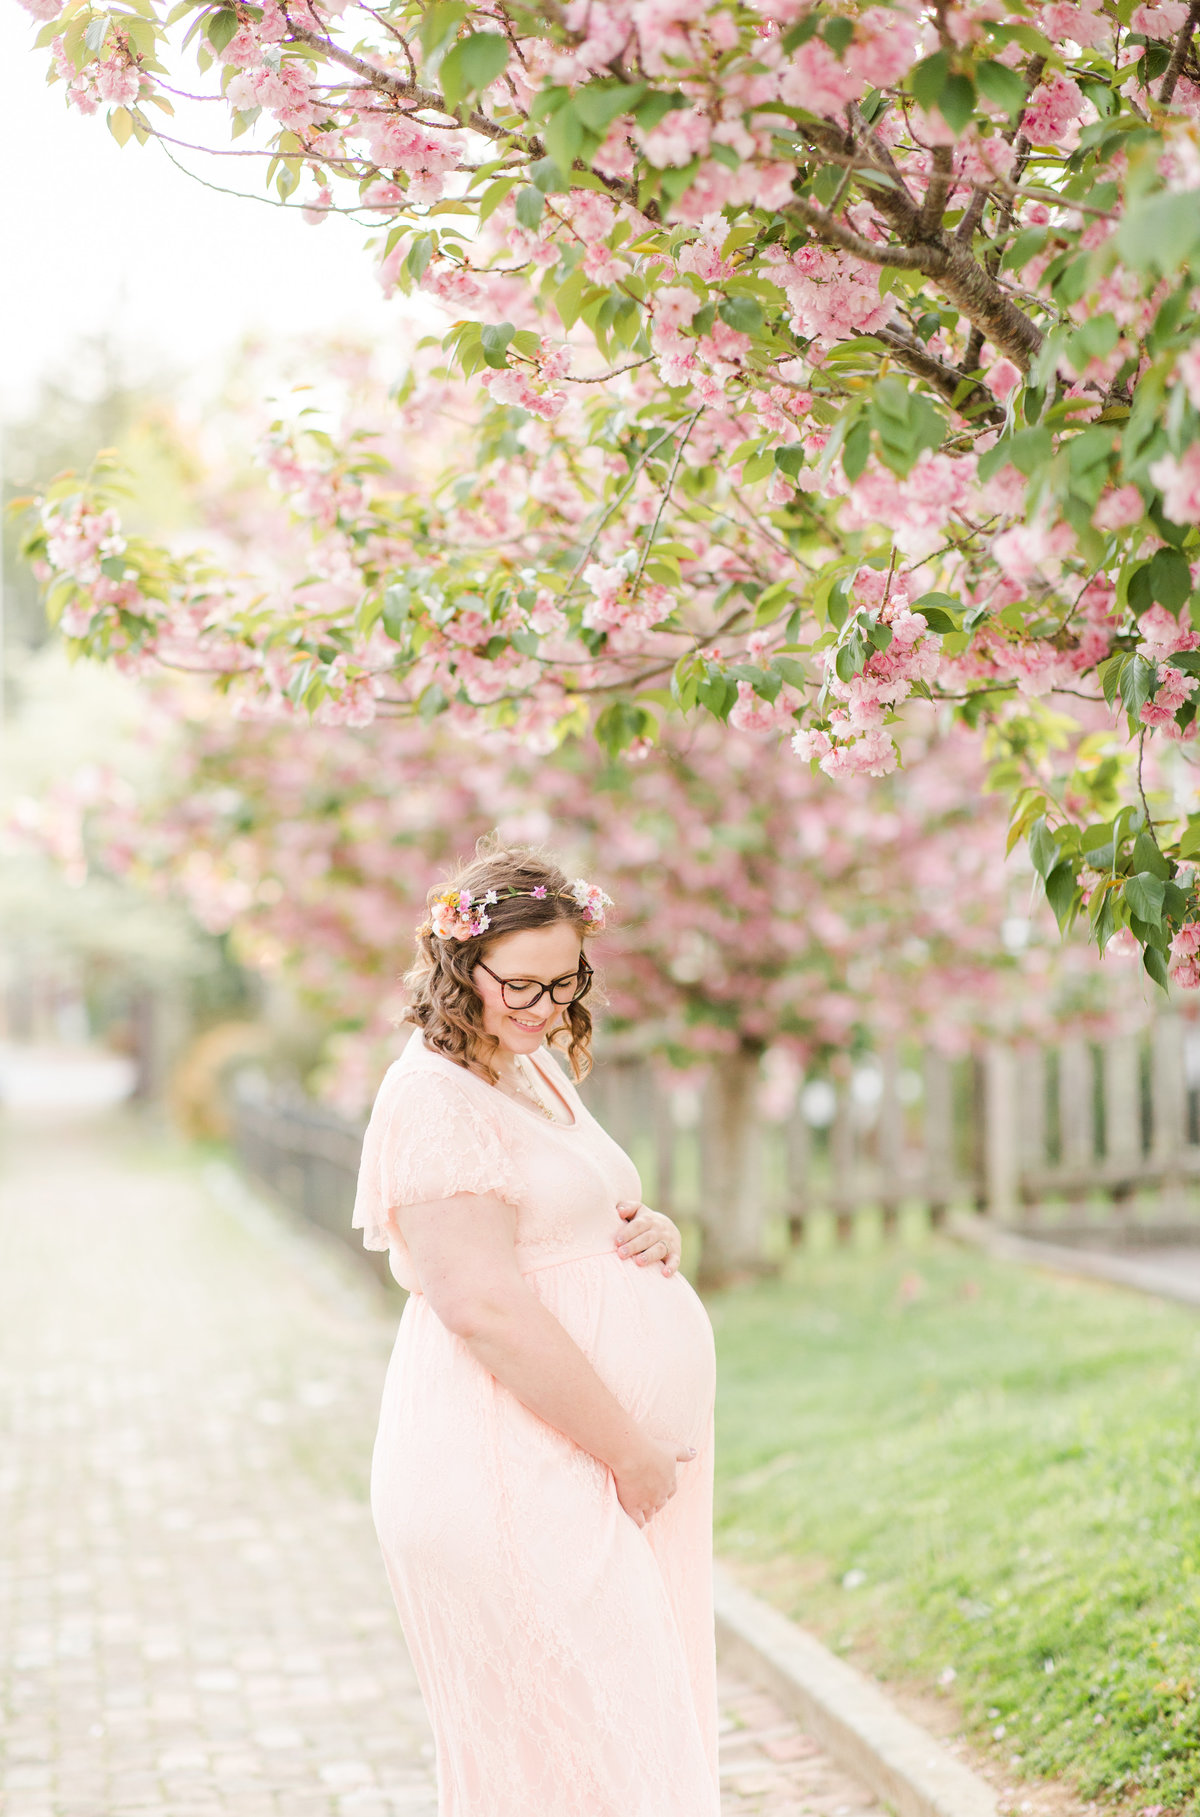 Gorgeous expecting mother poses with the cherry blossom trees